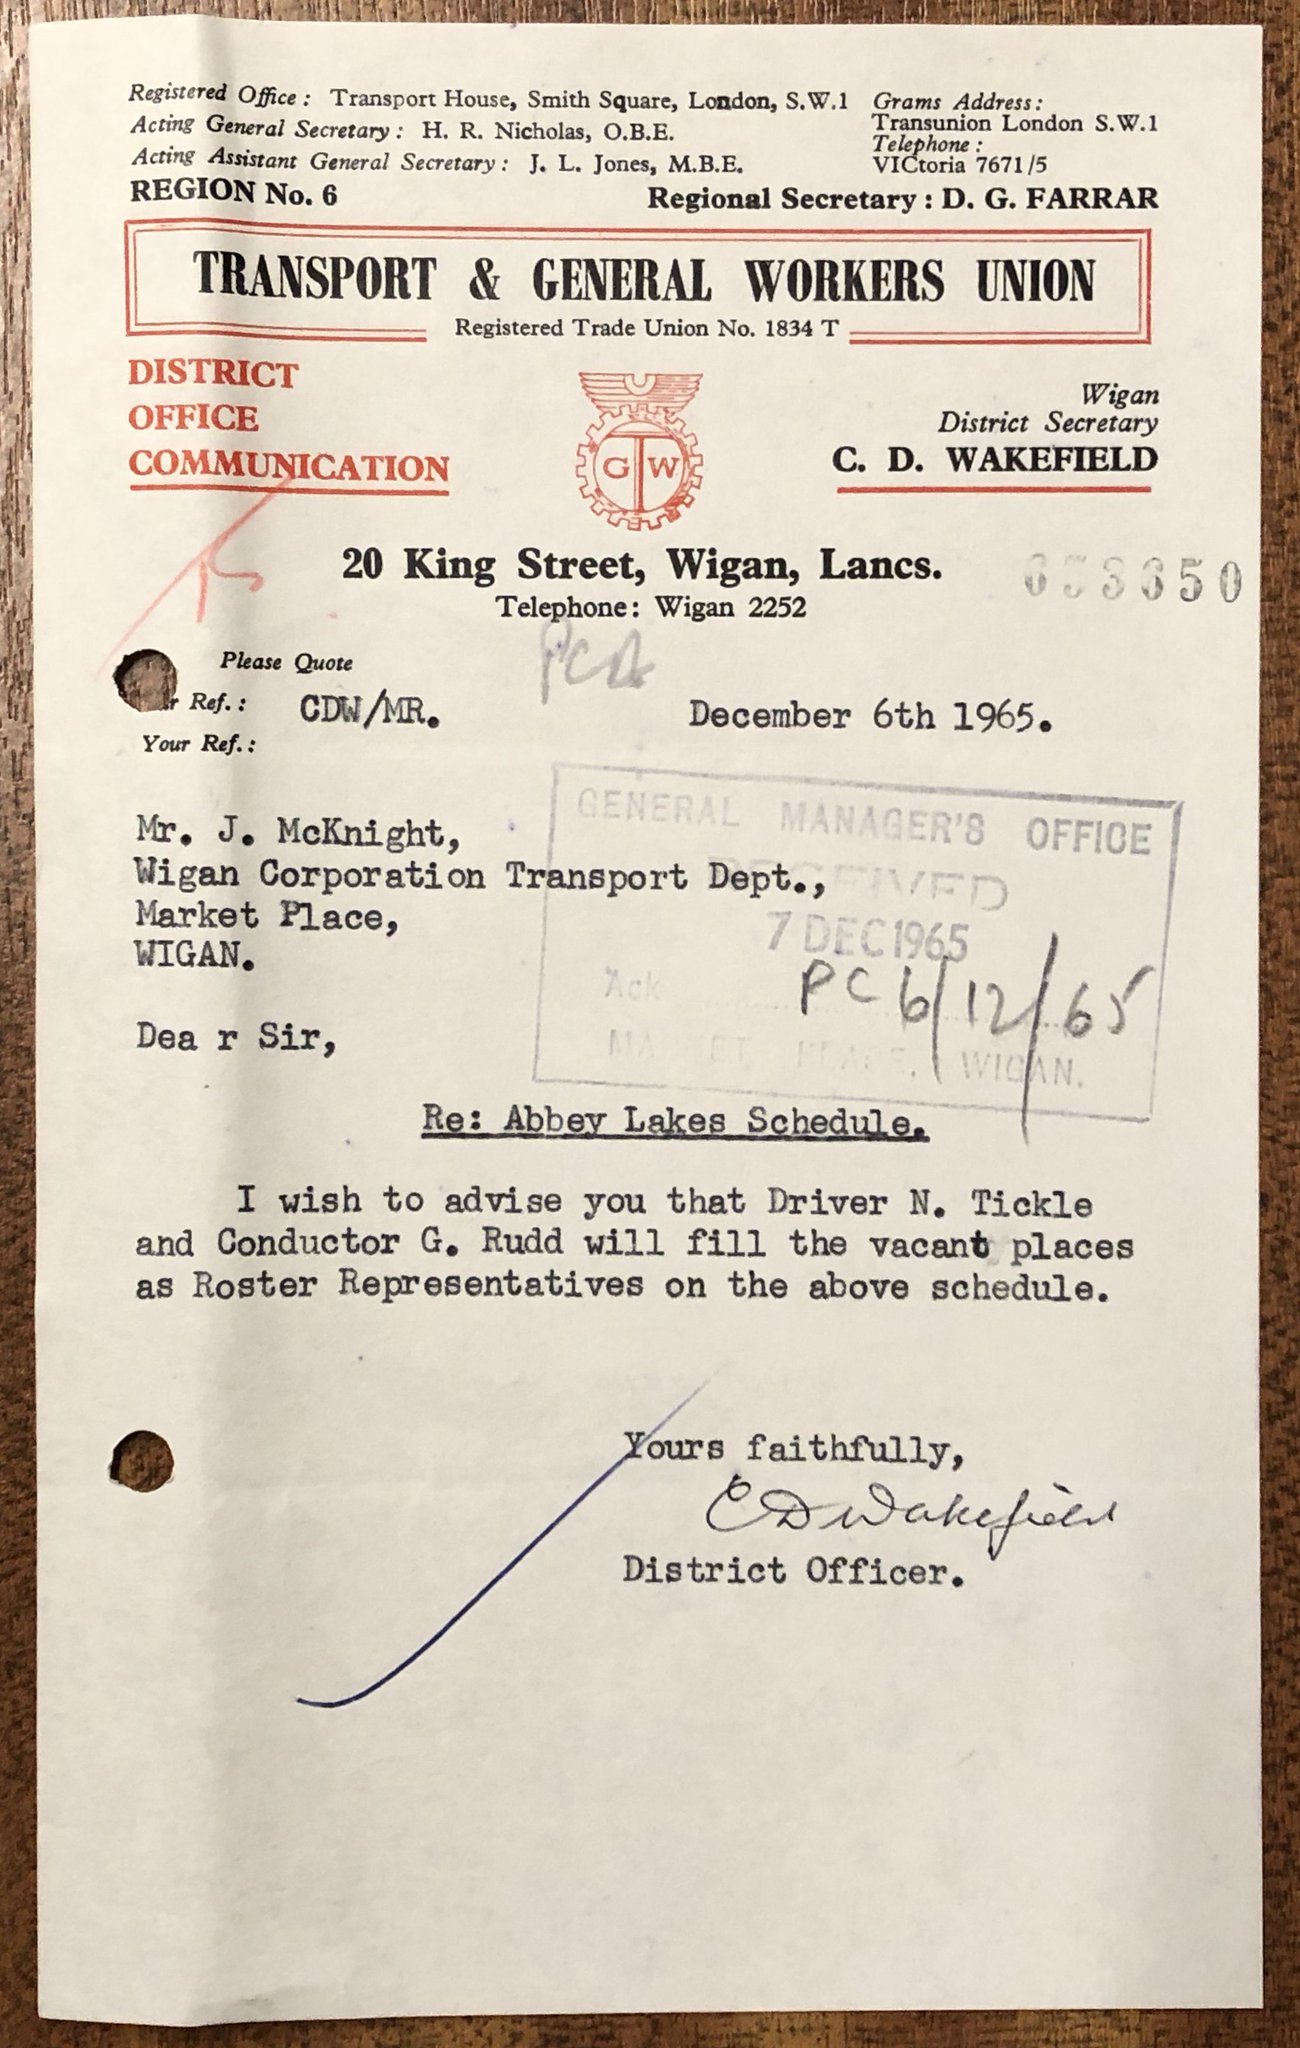 Museum Of Transport Greater Manchester So Ephemeral Yet Preserved In Our Archive Over 50 Years Later This Letter From The Tgwu Union To The Wigan Corporation General Manager Is